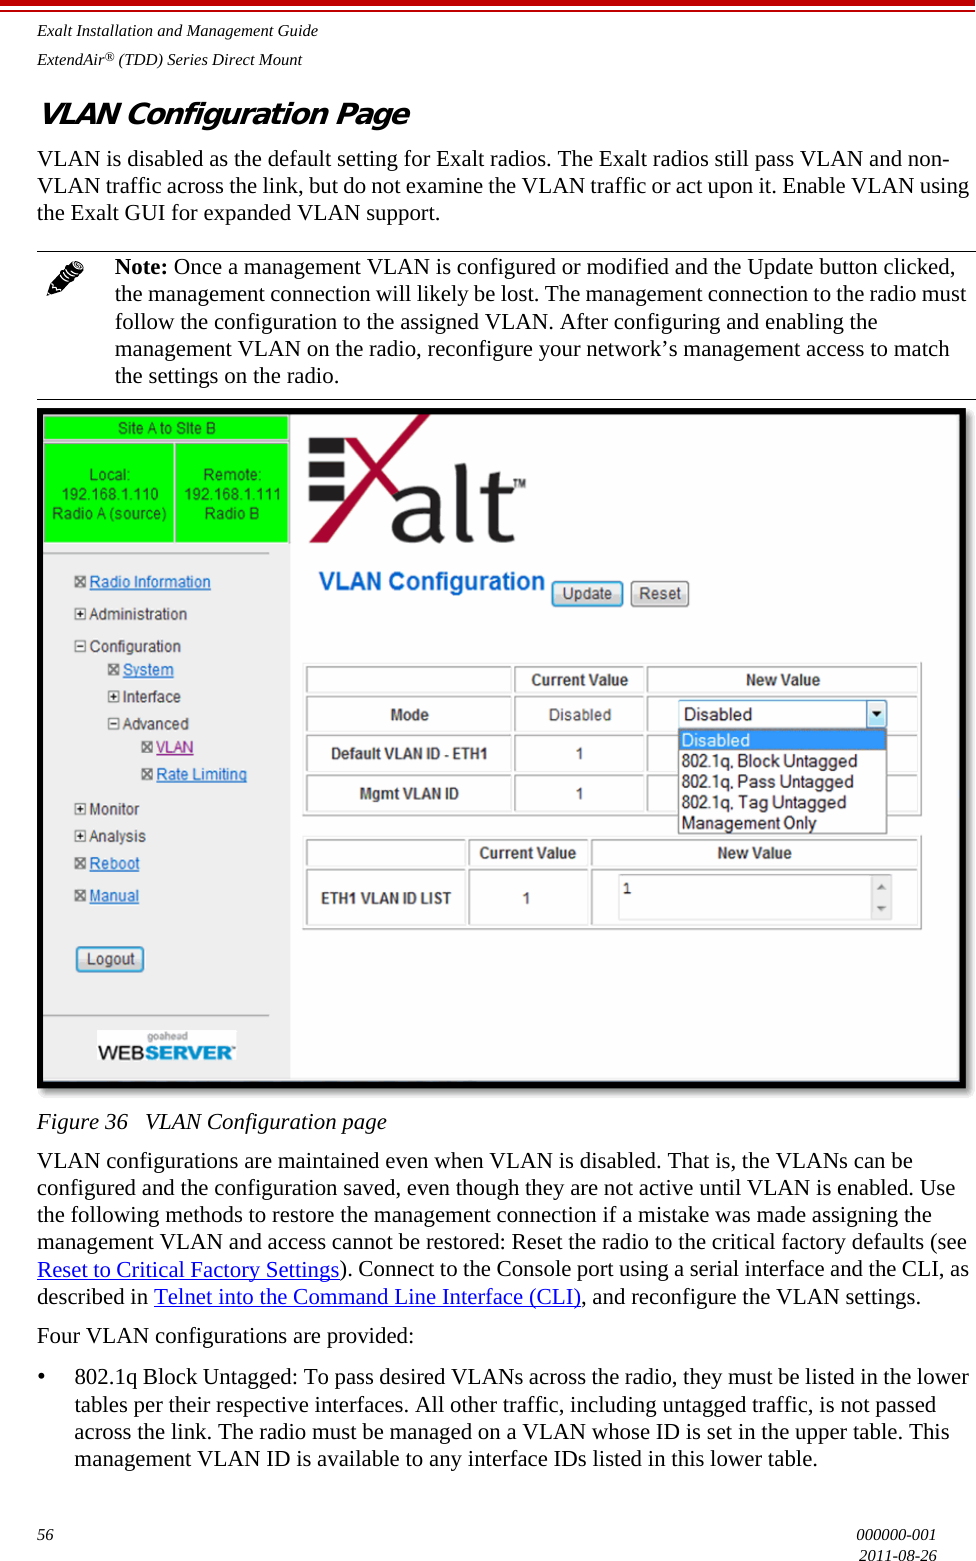 Exalt Installation and Management GuideExtendAir® (TDD) Series Direct Mount56 000000-0012011-08-26VLAN Configuration PageVLAN is disabled as the default setting for Exalt radios. The Exalt radios still pass VLAN and non-VLAN traffic across the link, but do not examine the VLAN traffic or act upon it. Enable VLAN using the Exalt GUI for expanded VLAN support.Figure 36   VLAN Configuration page VLAN configurations are maintained even when VLAN is disabled. That is, the VLANs can be configured and the configuration saved, even though they are not active until VLAN is enabled. Use the following methods to restore the management connection if a mistake was made assigning the management VLAN and access cannot be restored: Reset the radio to the critical factory defaults (see Reset to Critical Factory Settings). Connect to the Console port using a serial interface and the CLI, as described in Telnet into the Command Line Interface (CLI), and reconfigure the VLAN settings.Four VLAN configurations are provided:•802.1q Block Untagged: To pass desired VLANs across the radio, they must be listed in the lower tables per their respective interfaces. All other traffic, including untagged traffic, is not passed across the link. The radio must be managed on a VLAN whose ID is set in the upper table. This management VLAN ID is available to any interface IDs listed in this lower table.Note: Once a management VLAN is configured or modified and the Update button clicked, the management connection will likely be lost. The management connection to the radio must follow the configuration to the assigned VLAN. After configuring and enabling the management VLAN on the radio, reconfigure your network’s management access to match the settings on the radio.